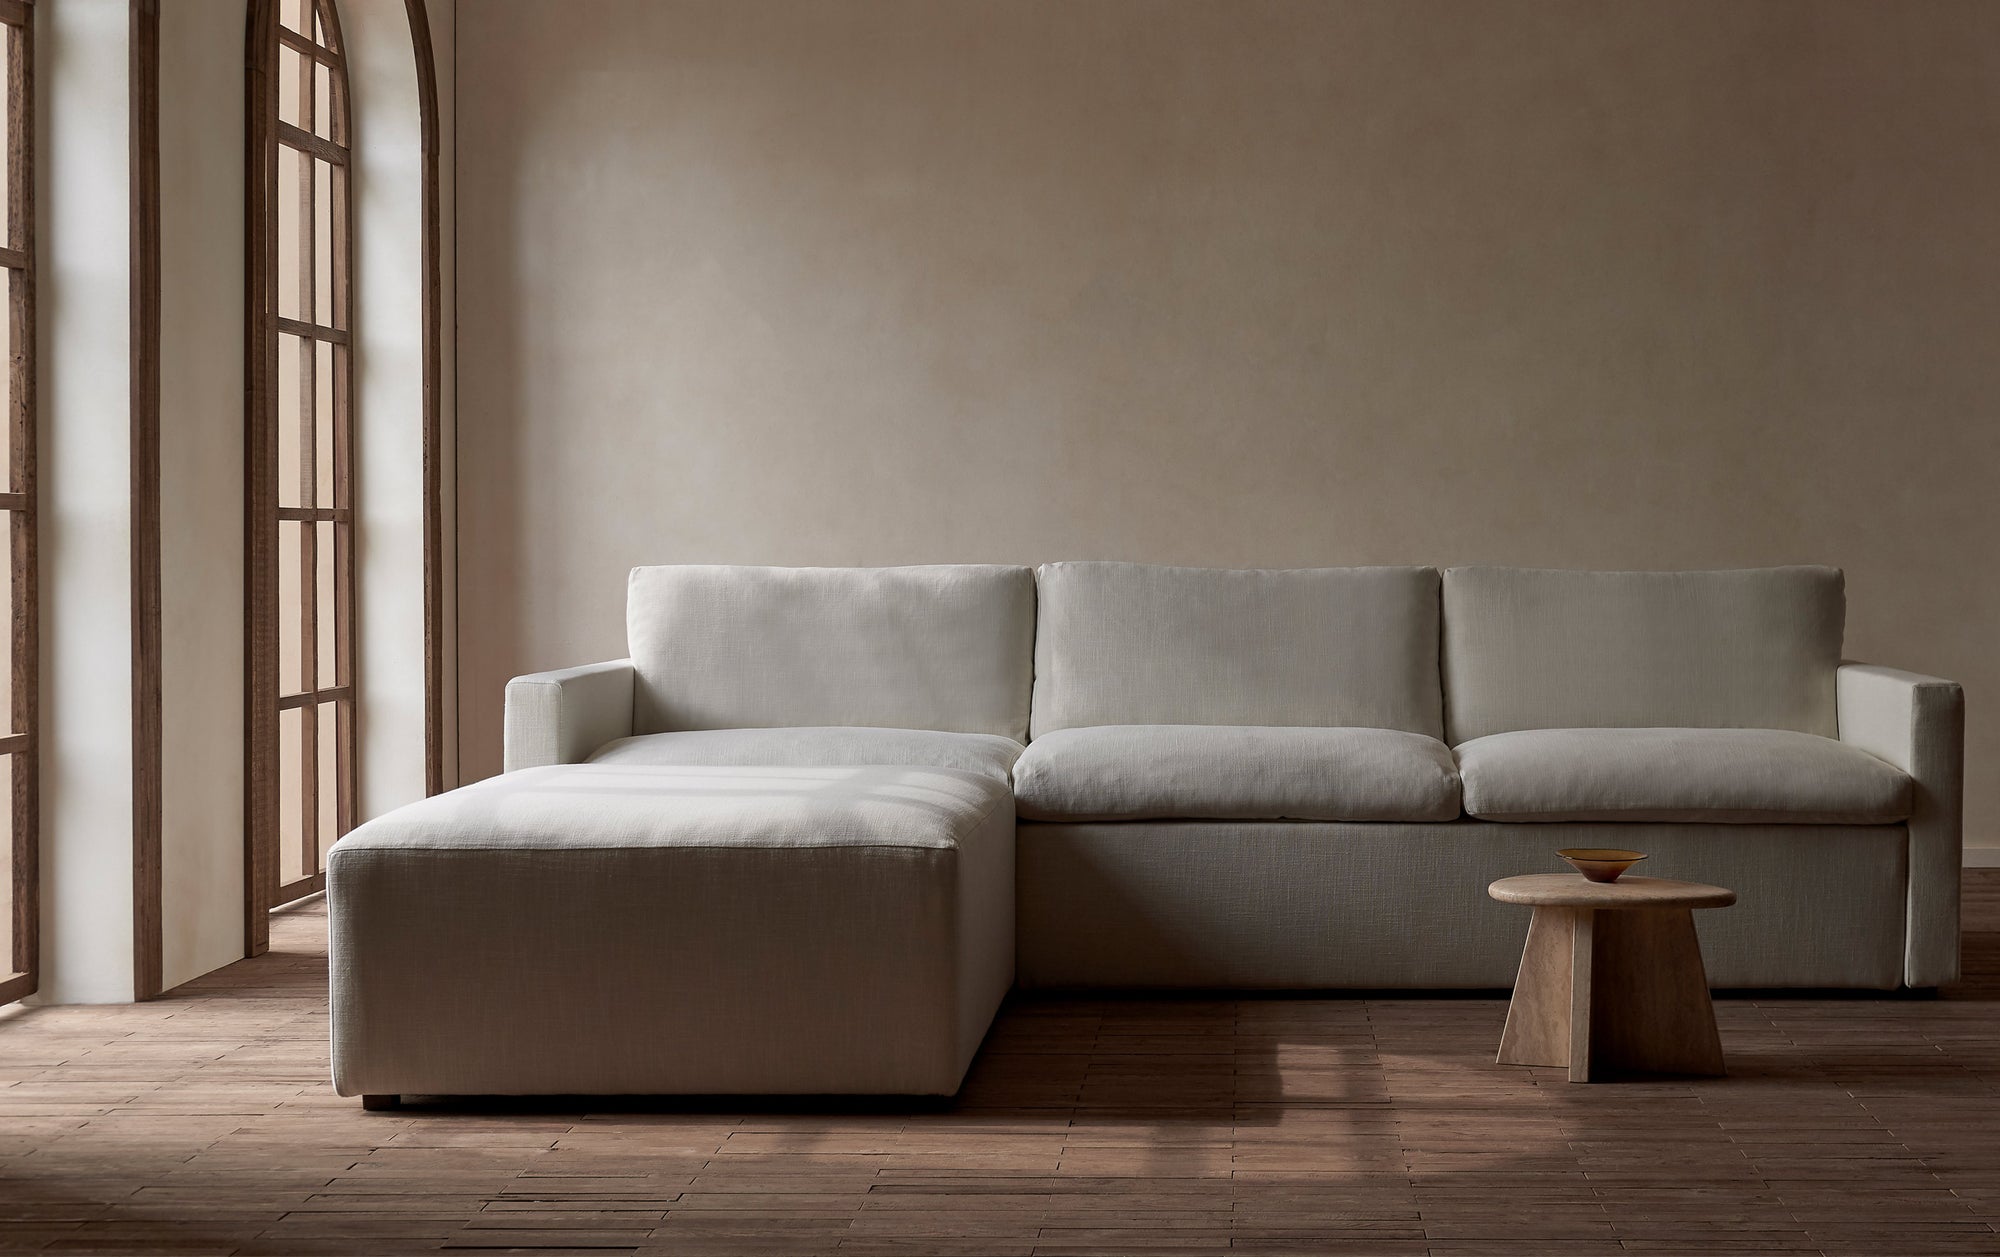 Devyn Sleeper Chaise Sectional in Young Coconut, a powdery white Recycled Poly Linen, sitting against a beige wall with a small wooden end table.